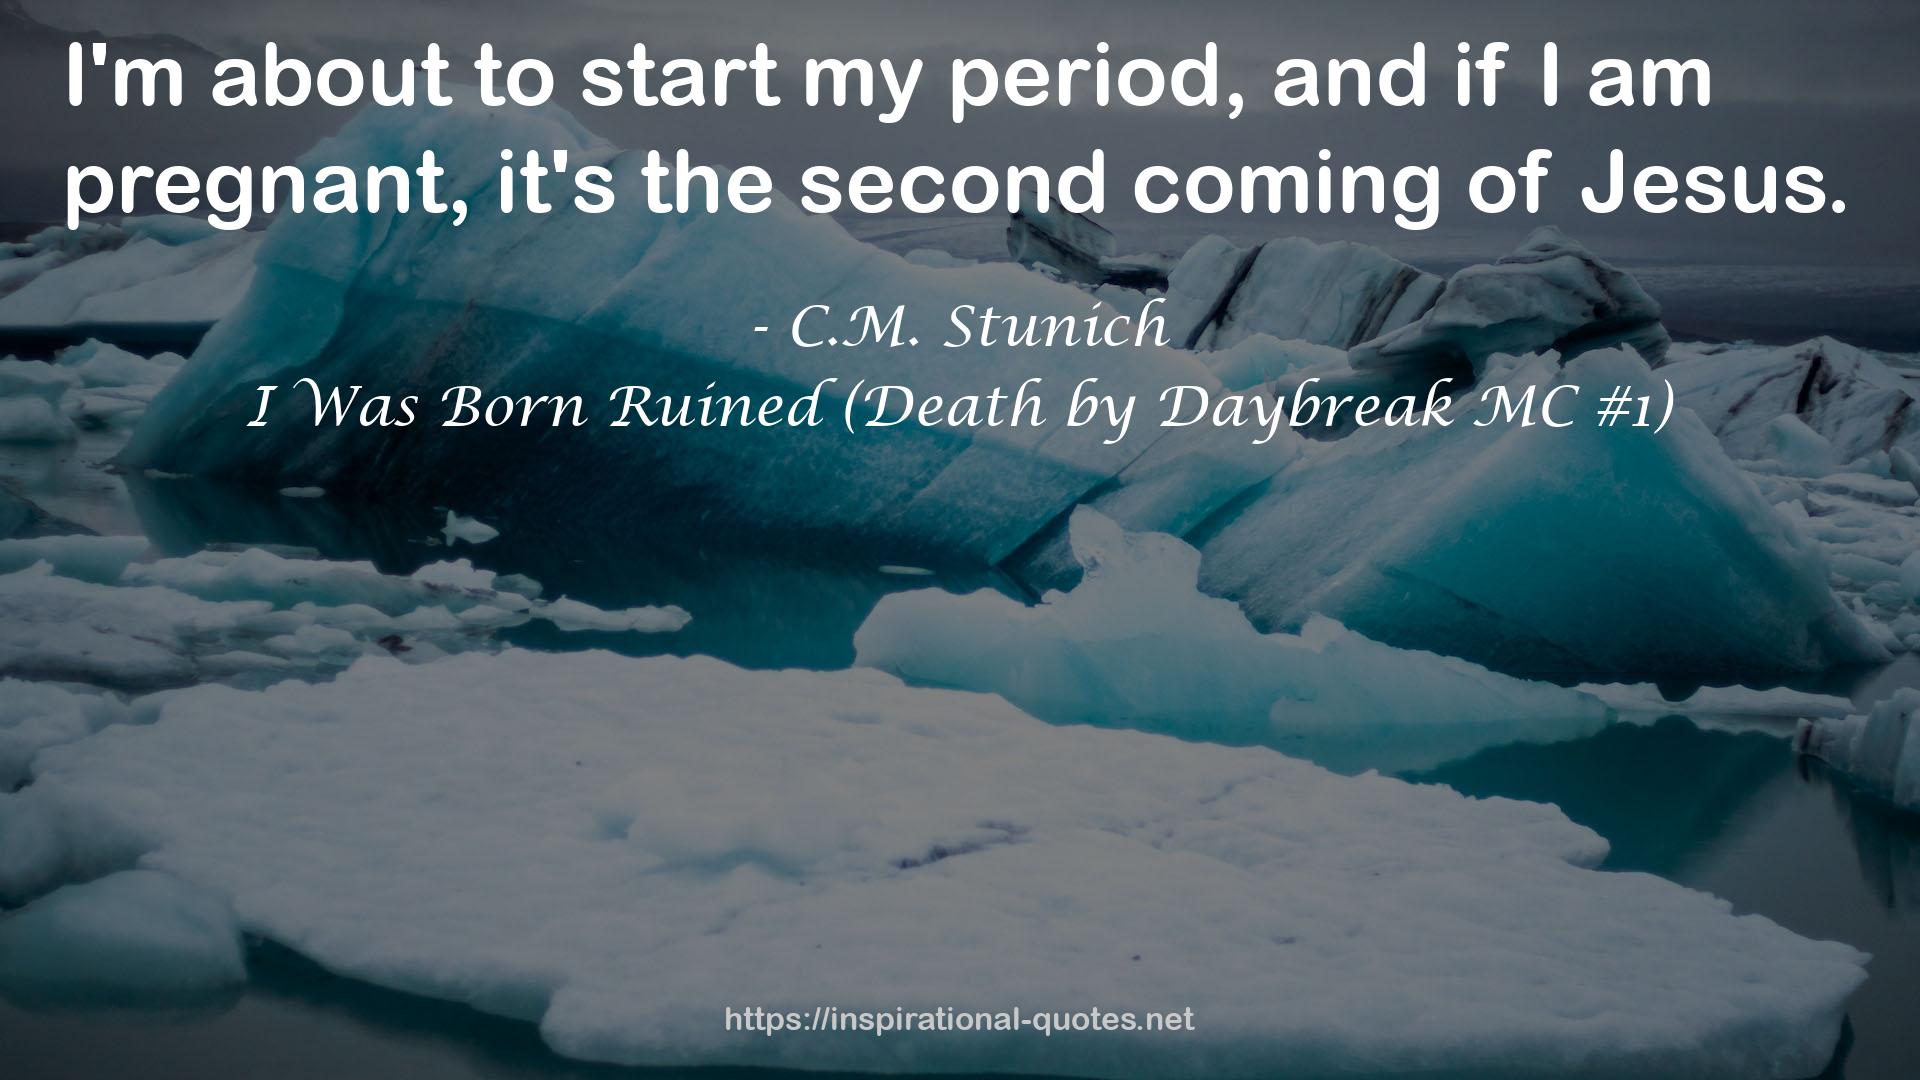 I Was Born Ruined (Death by Daybreak MC #1) QUOTES